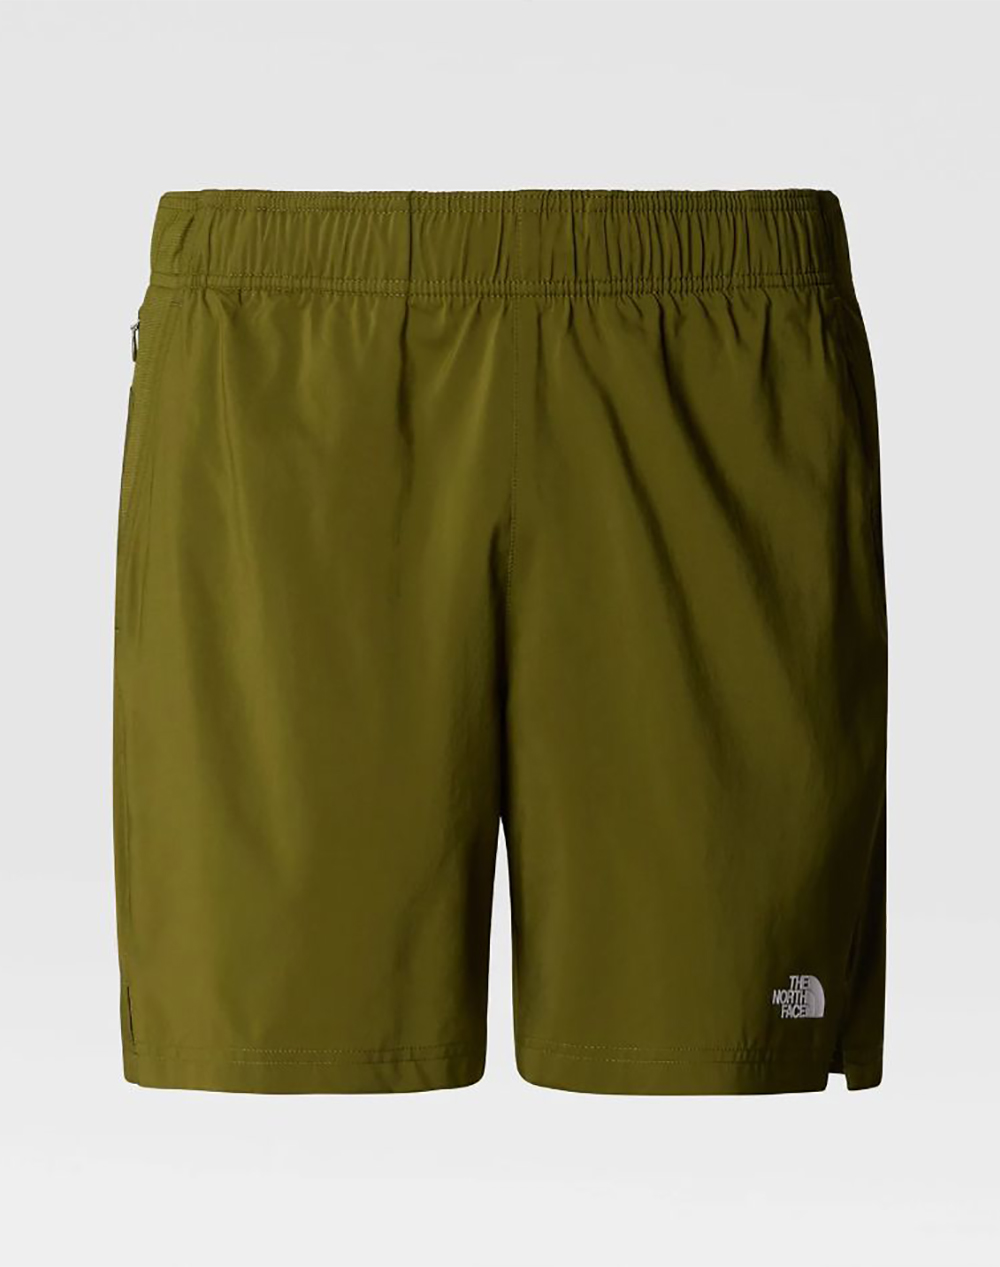 THE NORTH FACE M 24/7 7IN SHORT NF0A3O1B-NFPIB Olive 3820ATNFA2300006_XR28475